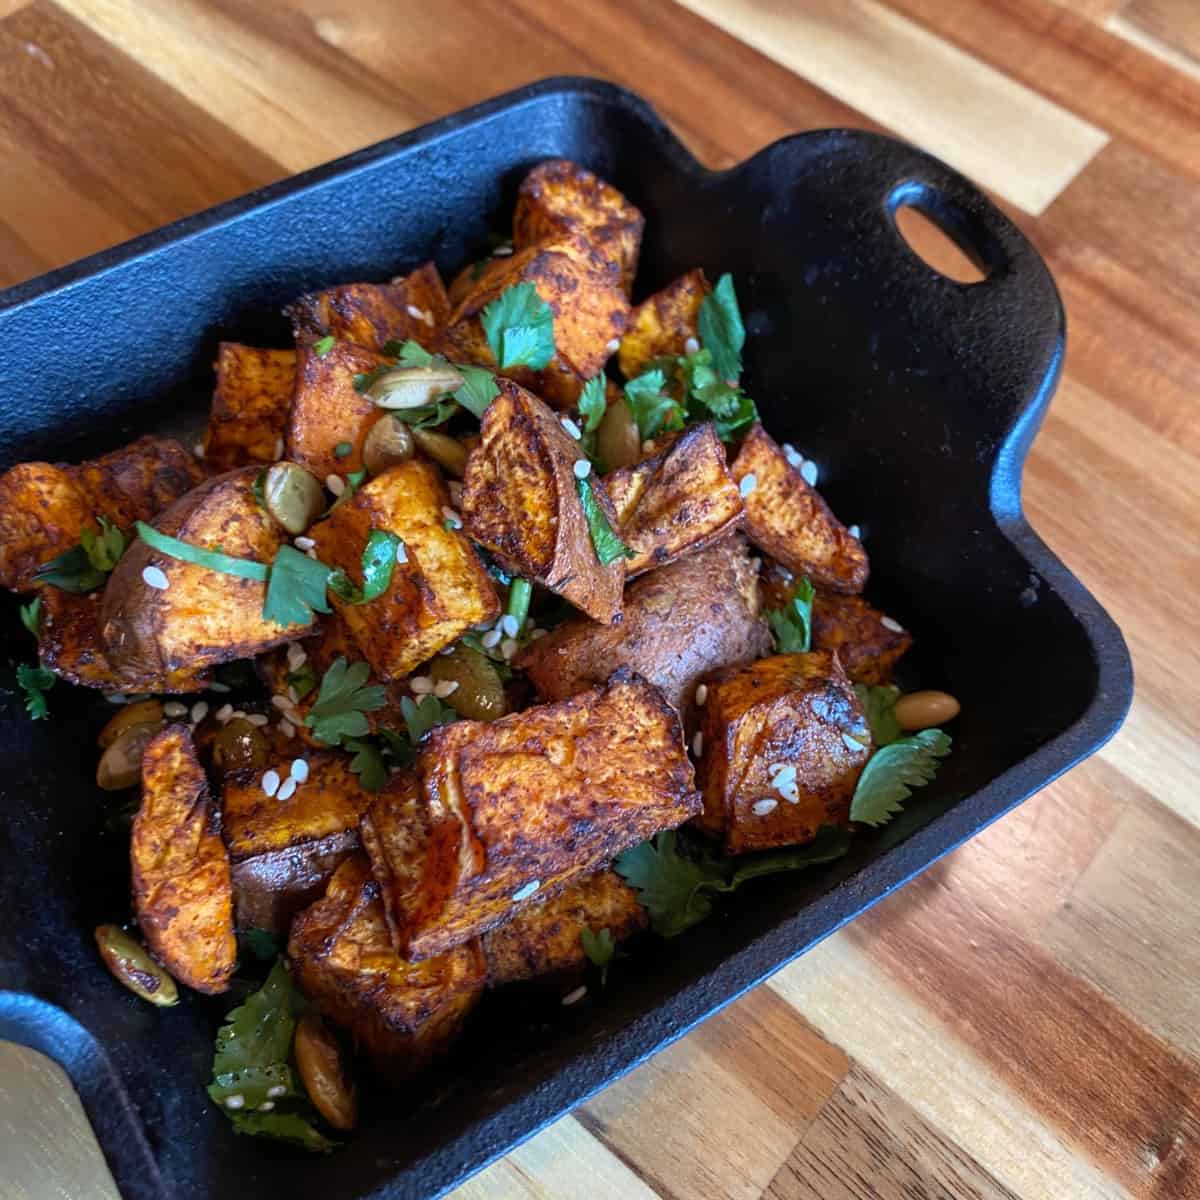 Seasoned Sweet Potatoes in a Cast Iron Dish on a Wood Table